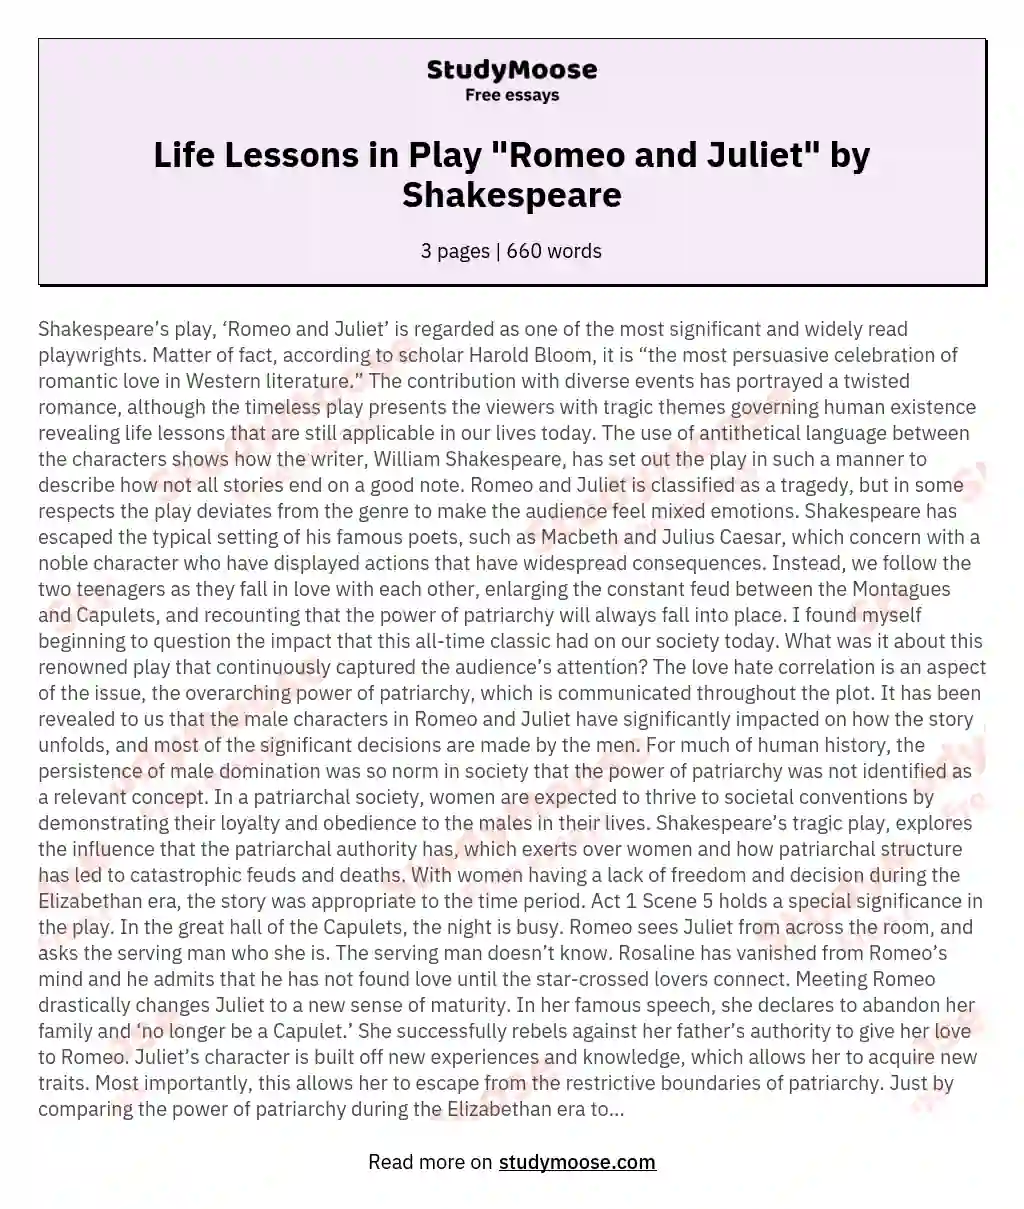 Life Lessons in Play "Romeo and Juliet" by Shakespeare essay